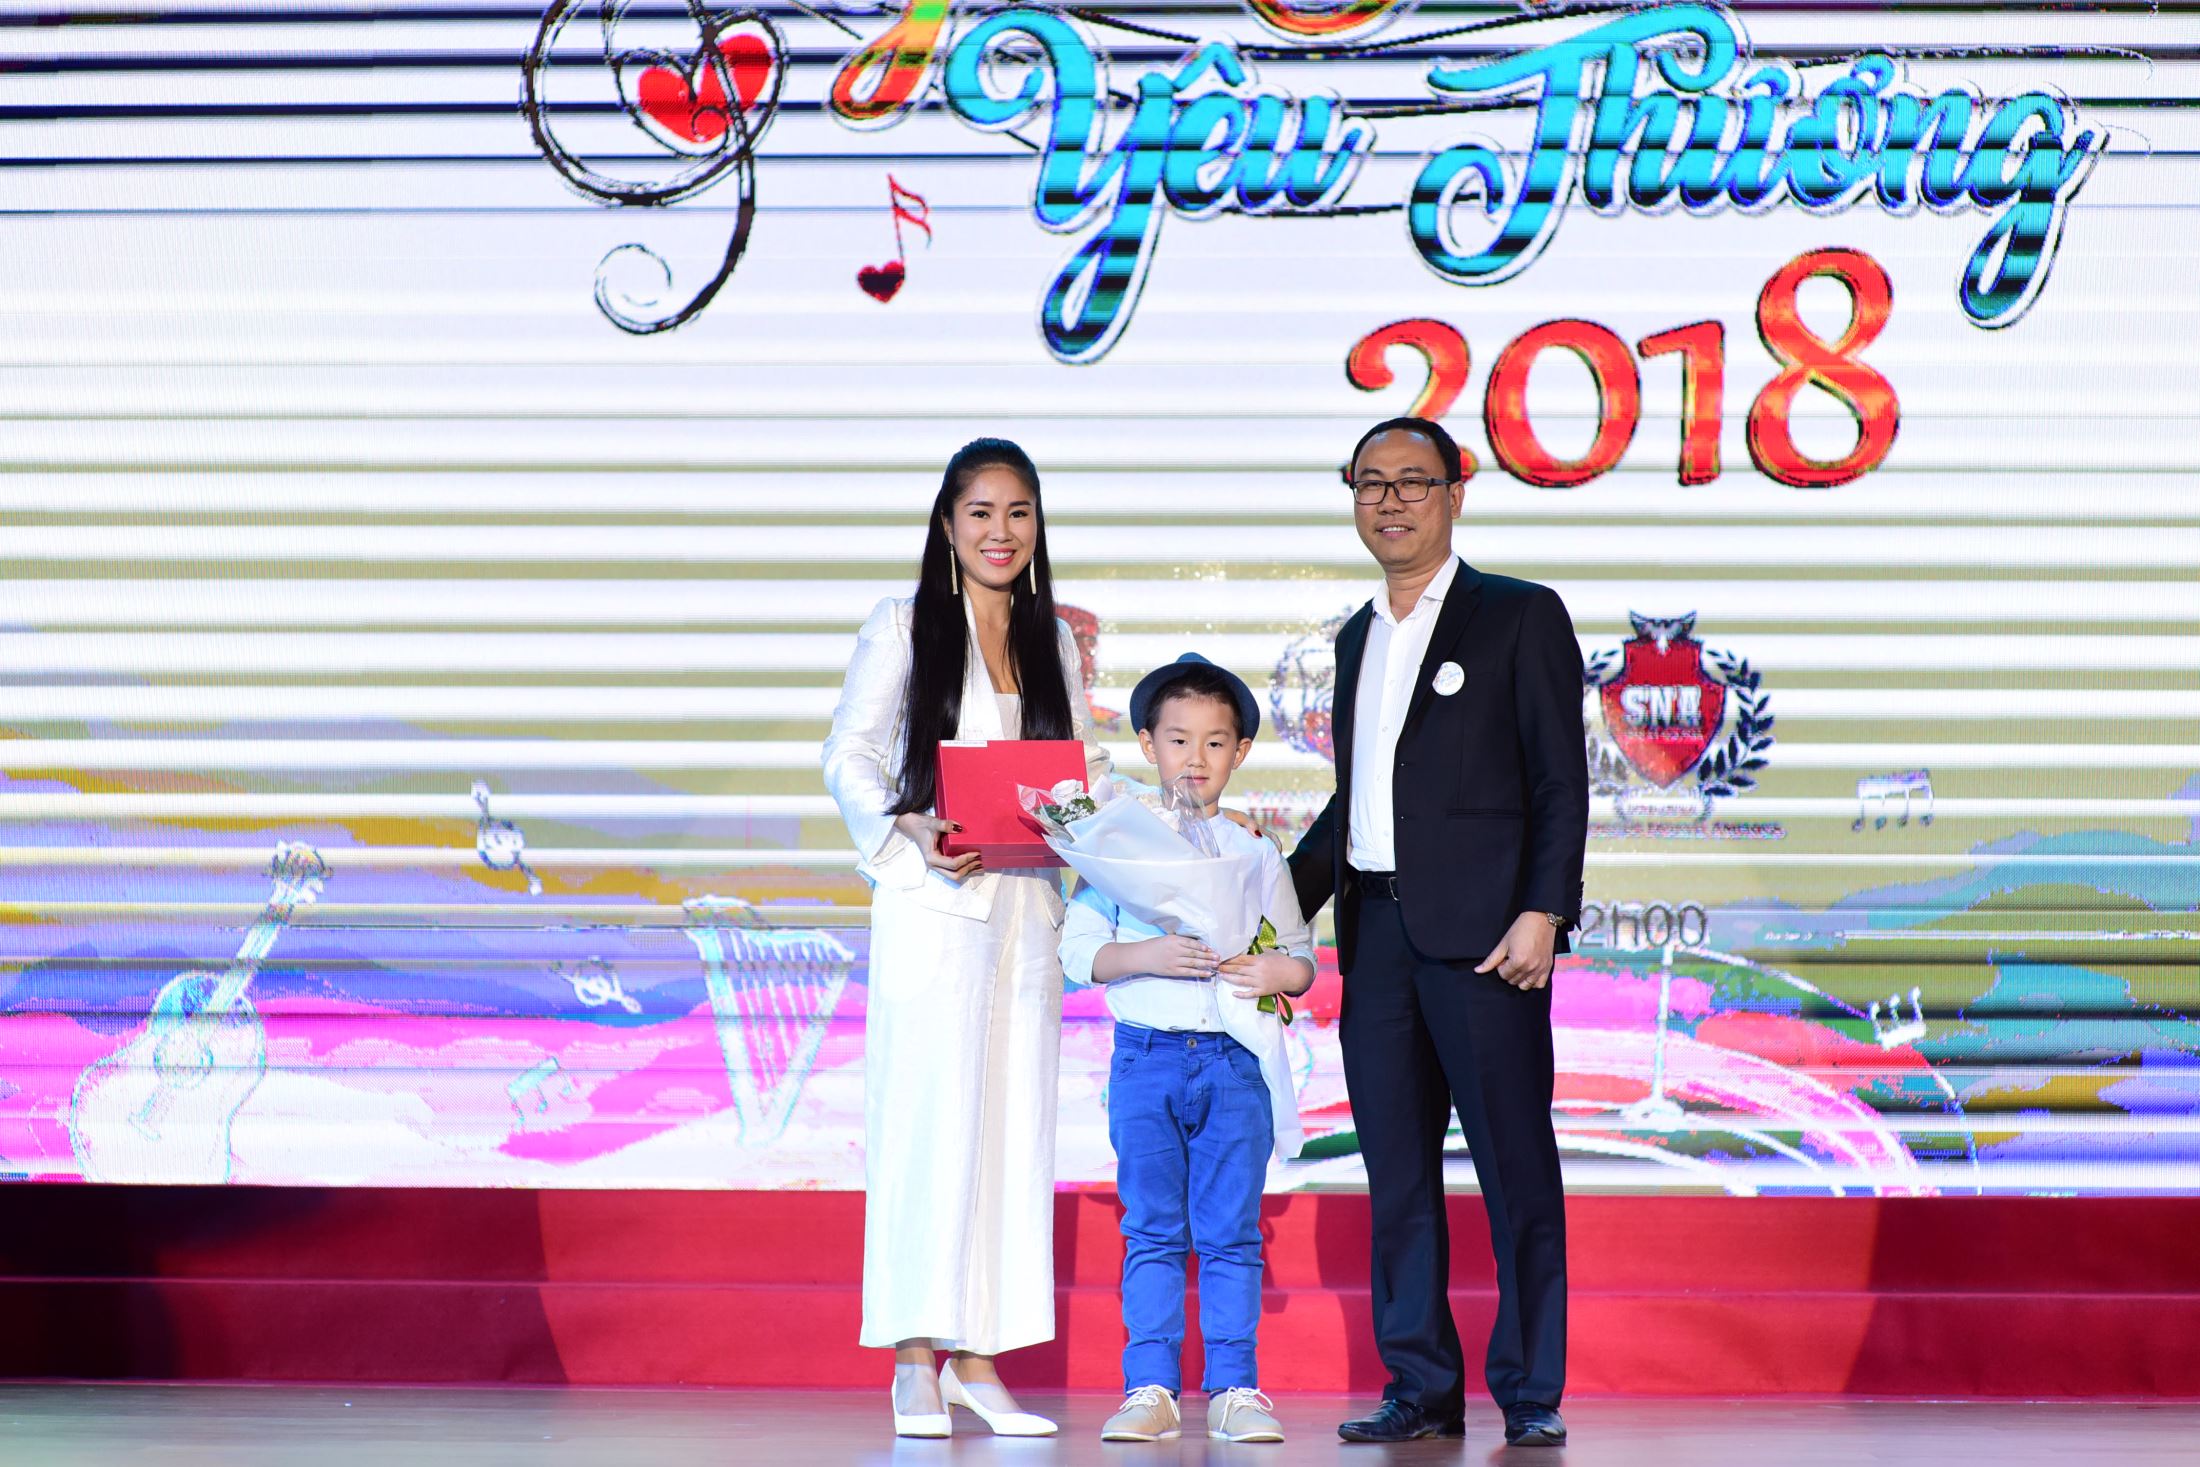 Actress Le Phuong and her son performed at "Love Melody" gala